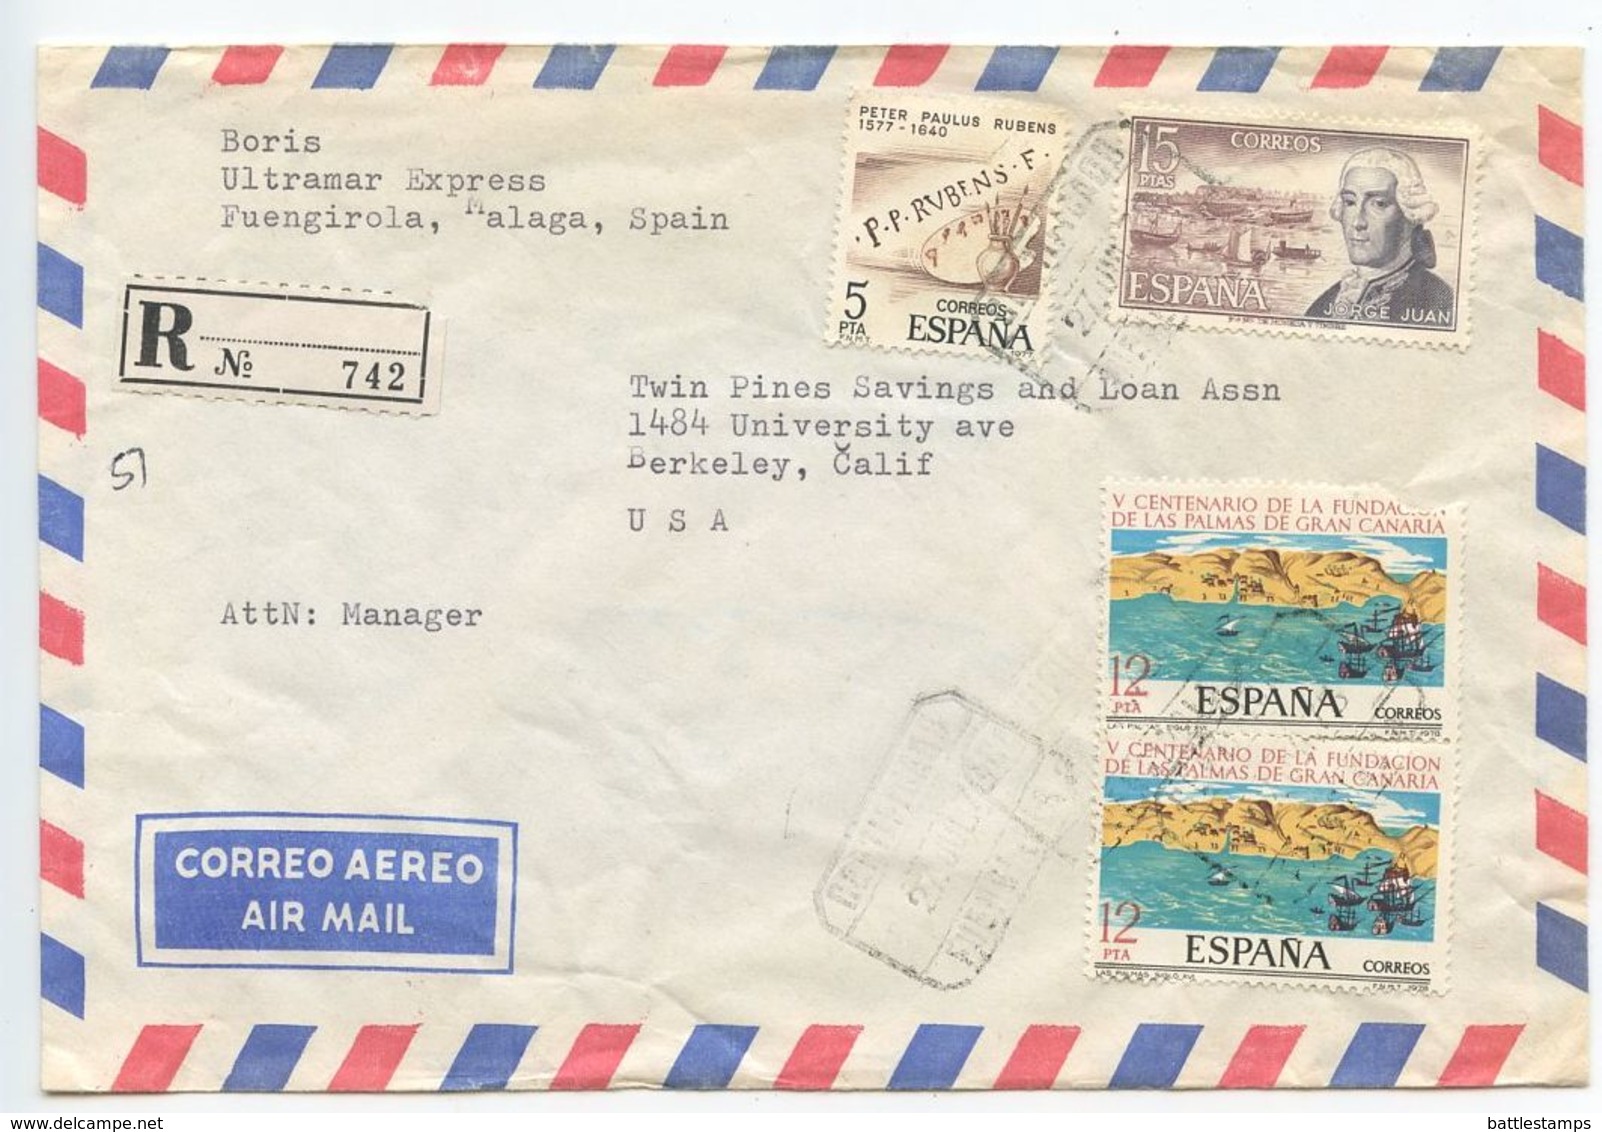 Spain 1978 Registered Airmail Cover Fuengirola, Malaga To Berkeley, California - Covers & Documents